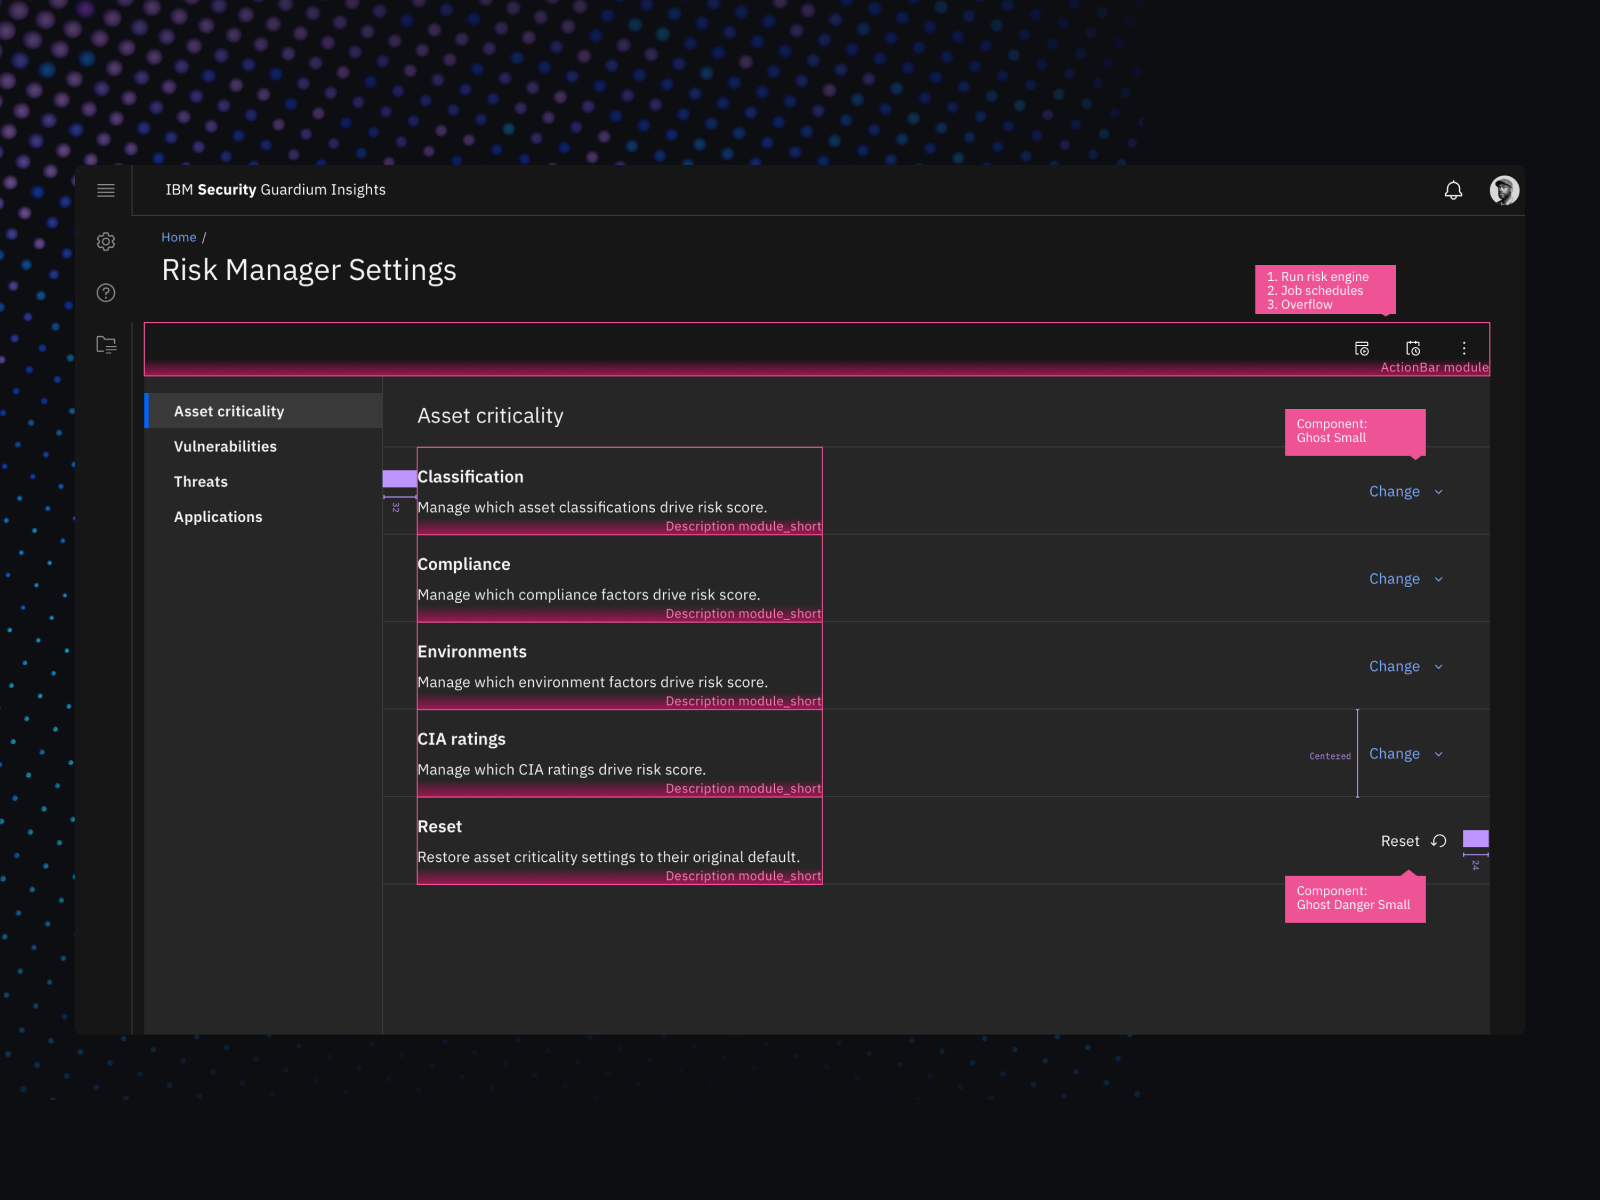 Shown is a snippet of the Risk Manager UI with redlines and outlines of components